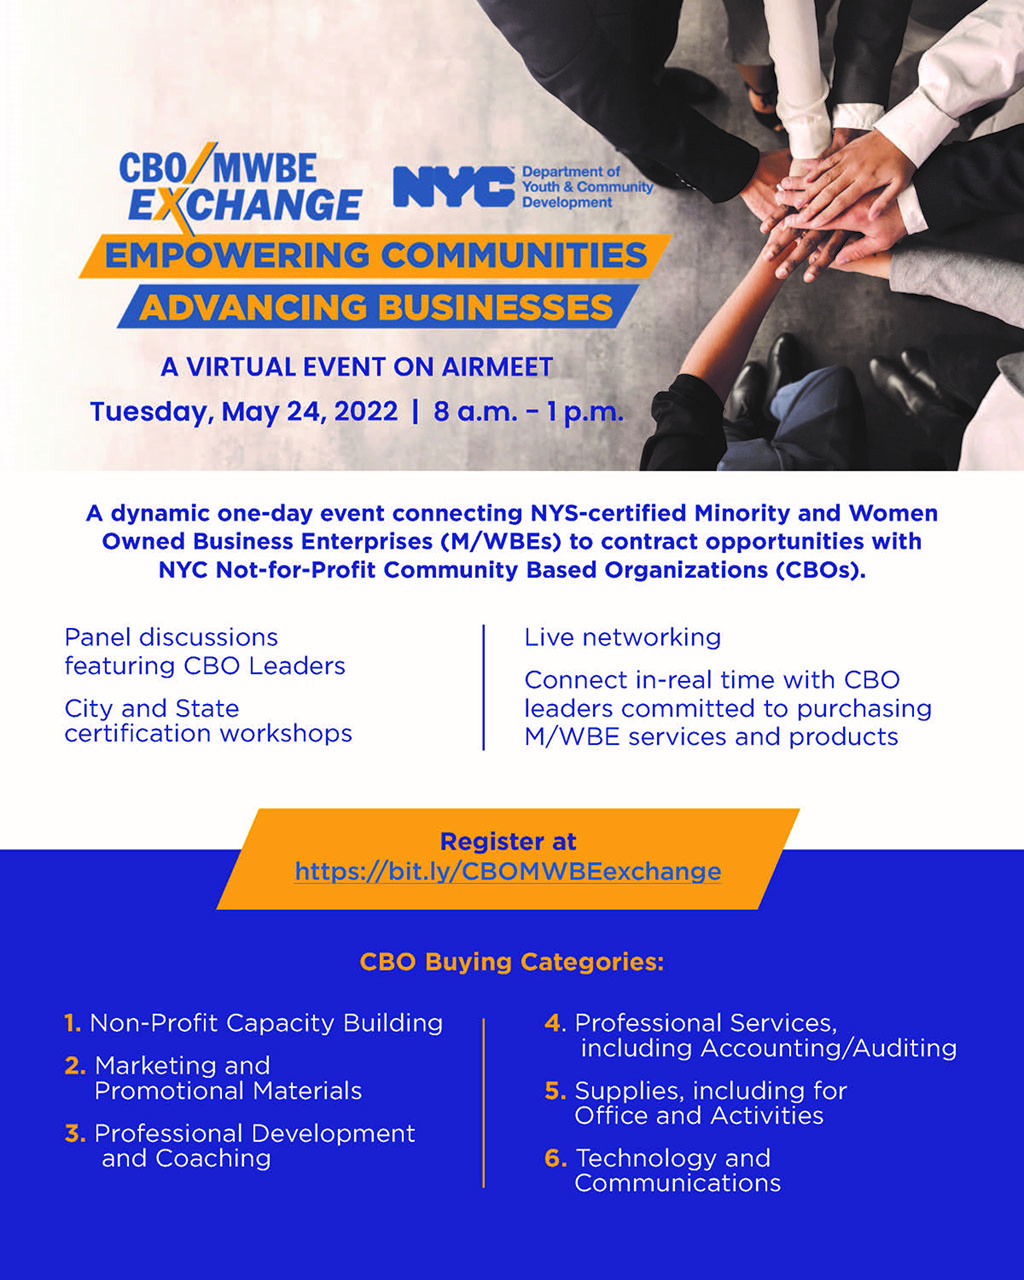 Copy of flyer with people in team unity hand stance titled CBOMWBE Exchange Conference, “Empowering Communities, Advancing Businesses,” on Tuesday, May 24, 2022